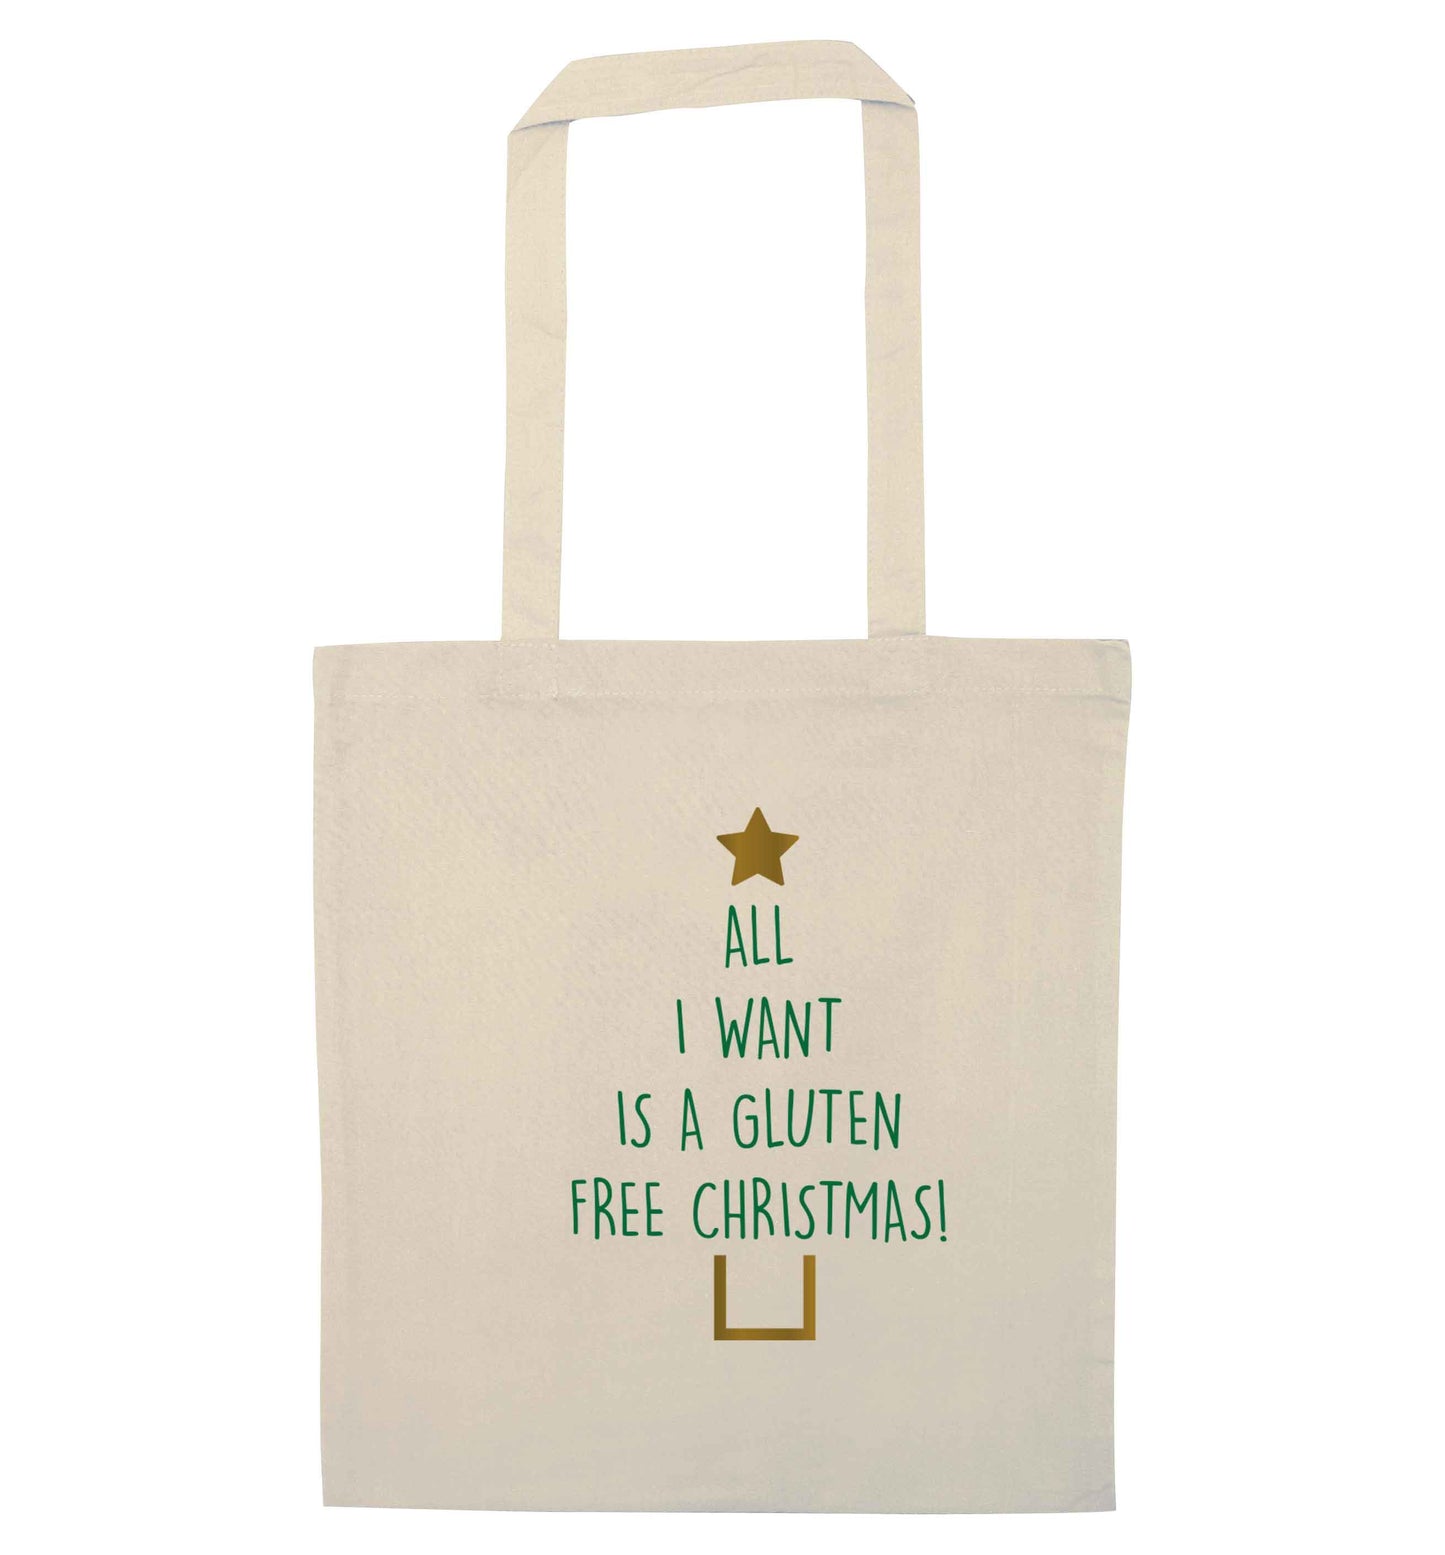 All I want is a gluten free Christmas natural tote bag